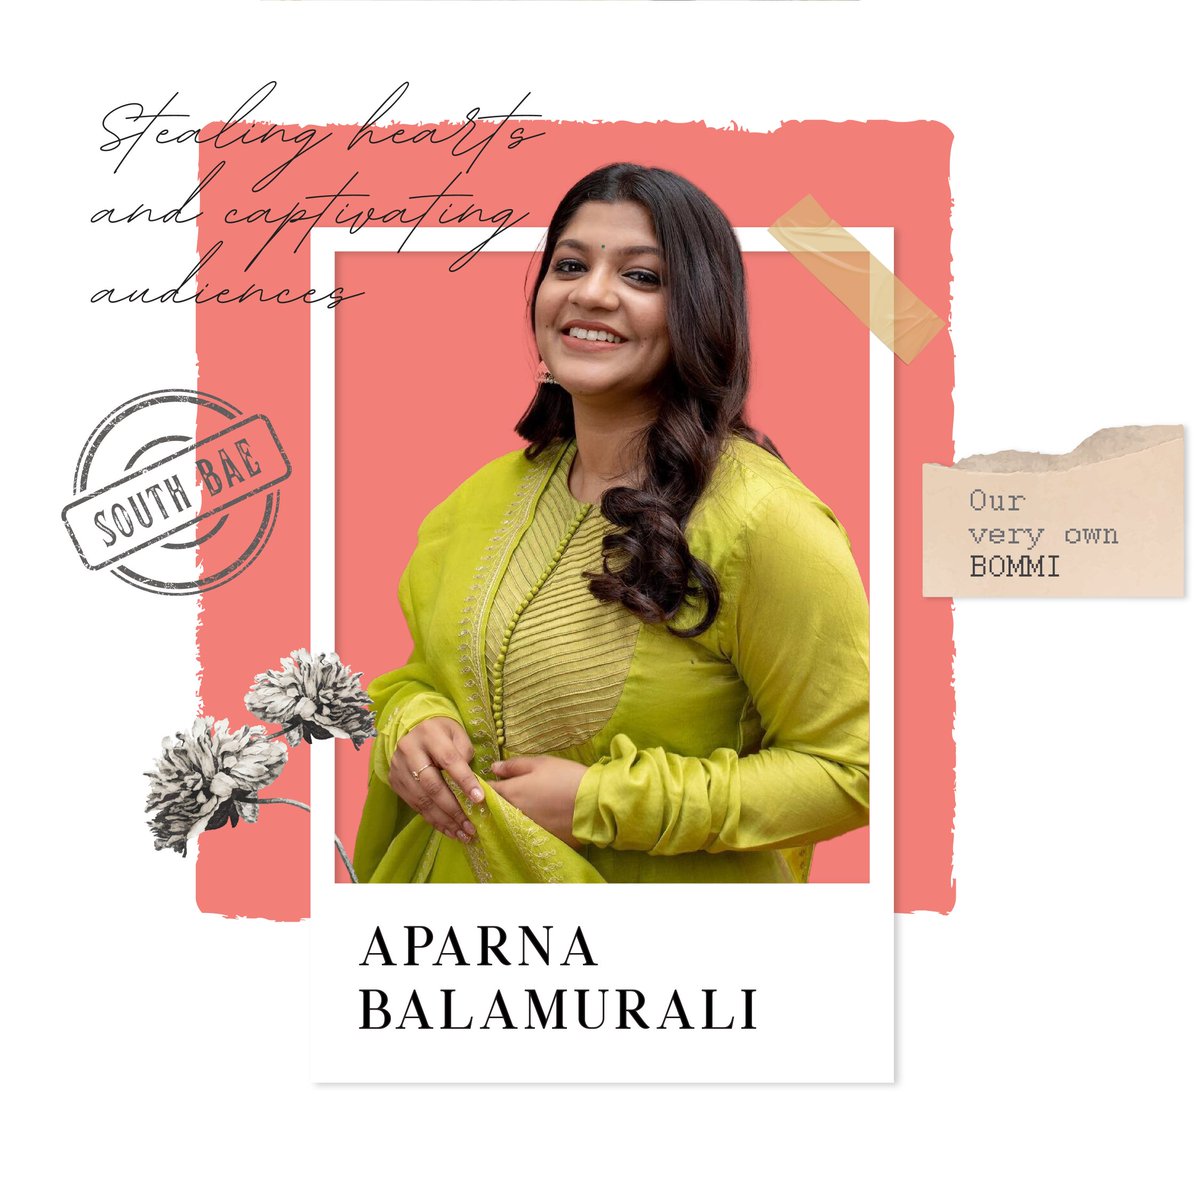 The raw, authentic & the ever charming - Aparna Balamurali Portraying strong-willed characters with unparalleled grace and charm. #Southbay #SouthbayTalent #Aparnabalamurali #Indianactor #ndianCinema @Aparnabala2